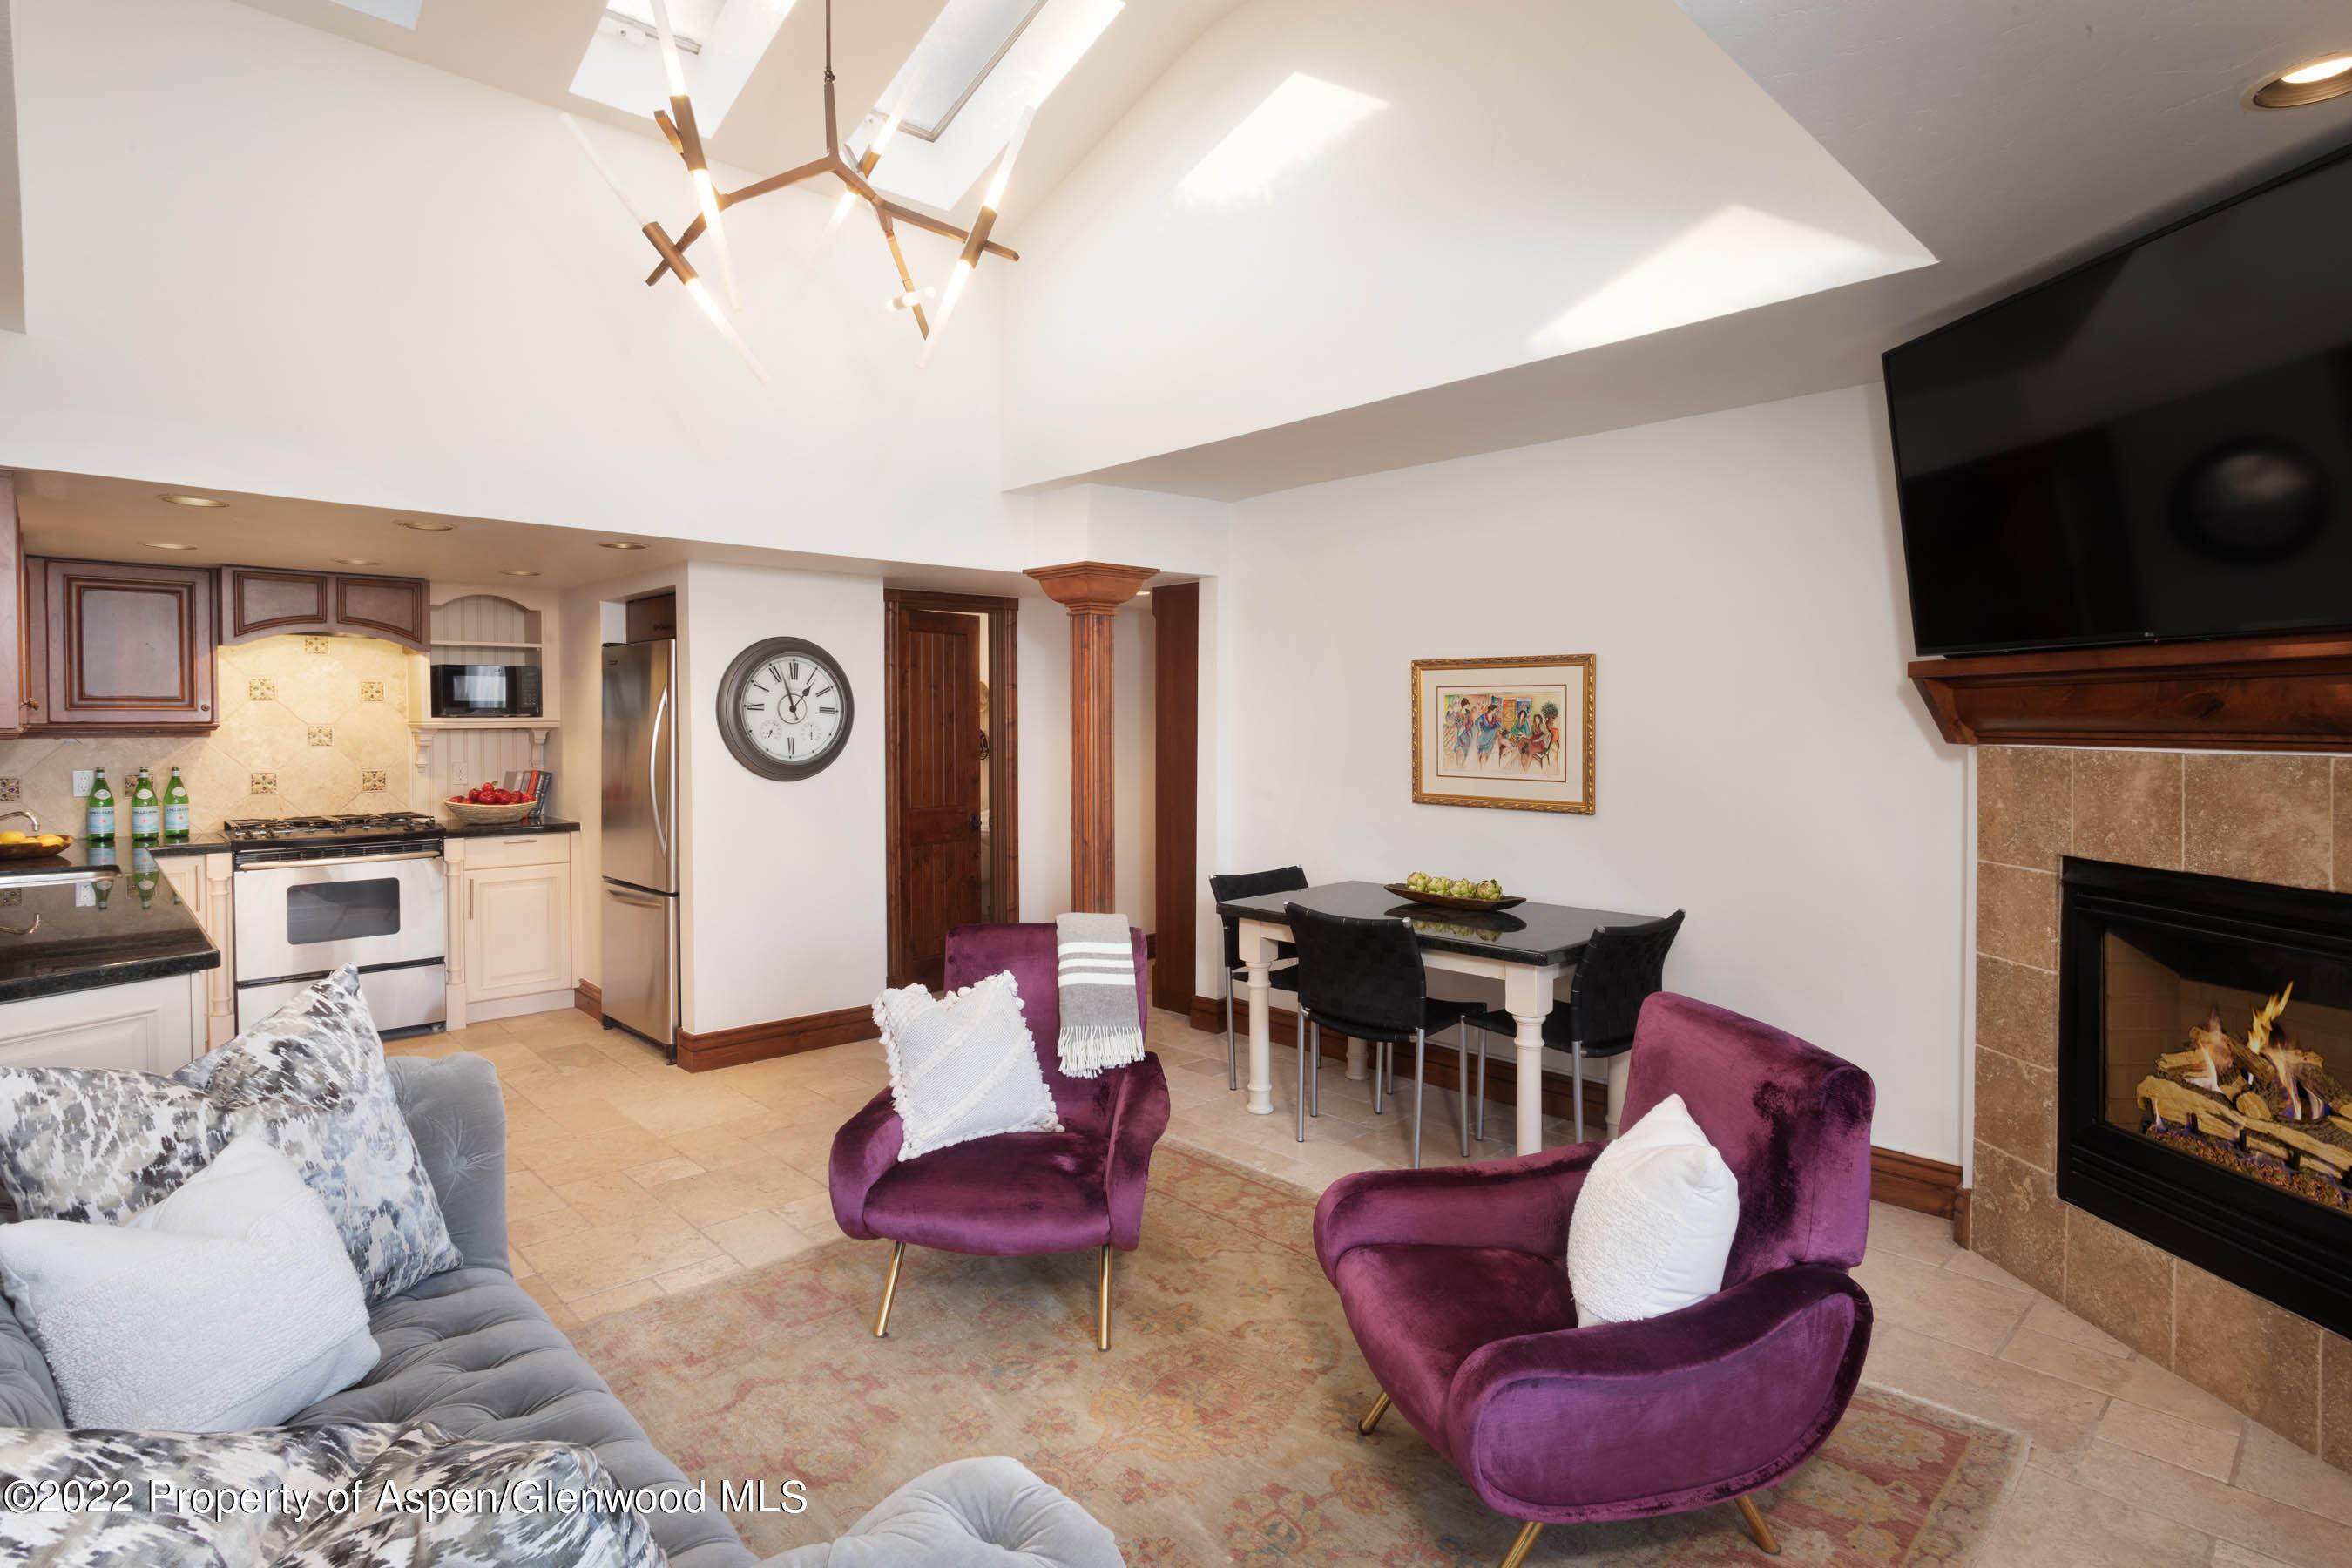 Lovely, 2 bedroom condominium with coveted ski in access off the Little Nell ski run, and an easy walk to the gondola to ski out.